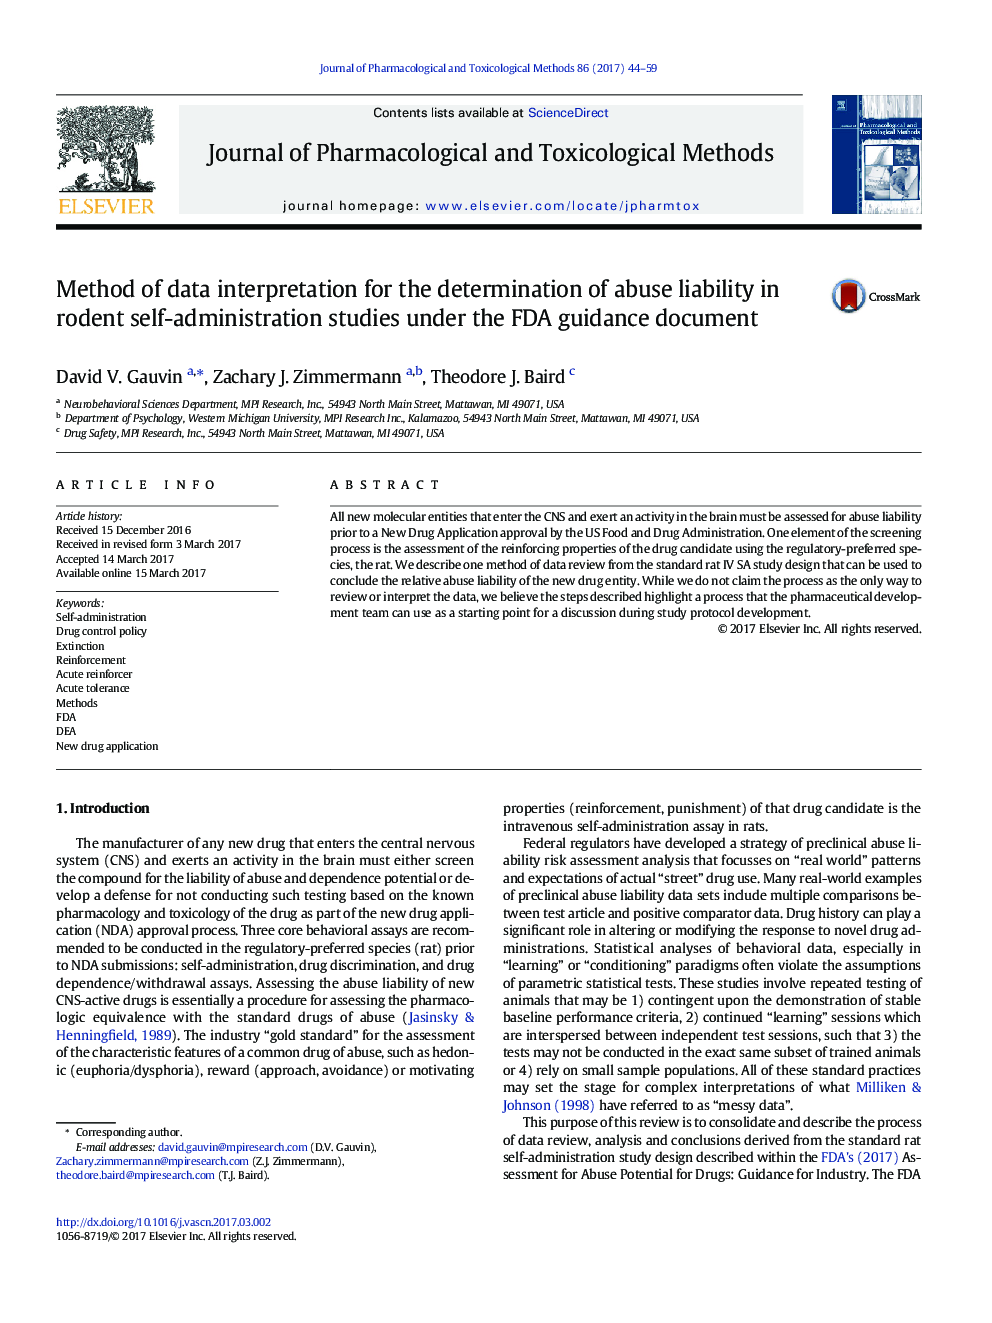 Method of data interpretation for the determination of abuse liability in rodent self-administration studies under the FDA guidance document